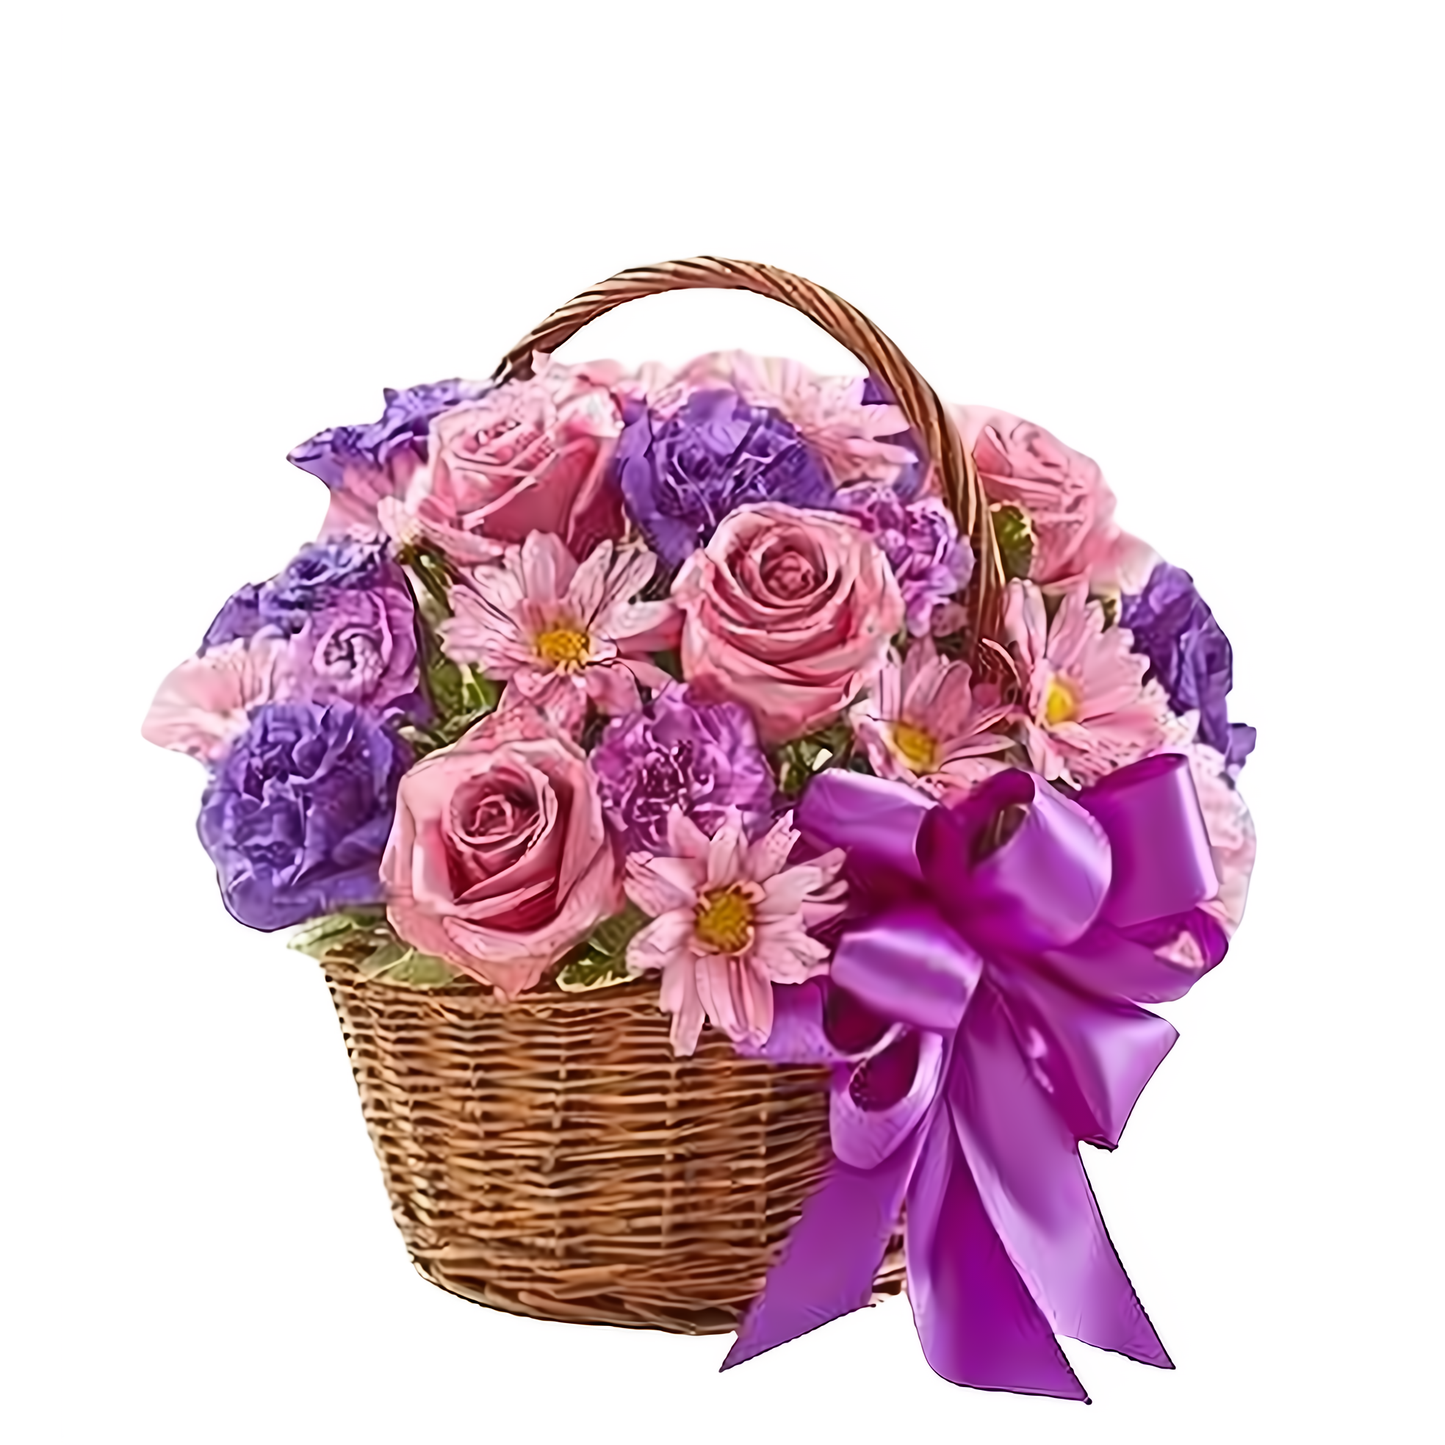 NYC Flower Delivery - Basket of Blooms - Seasonal > Mother's Day - 5/9